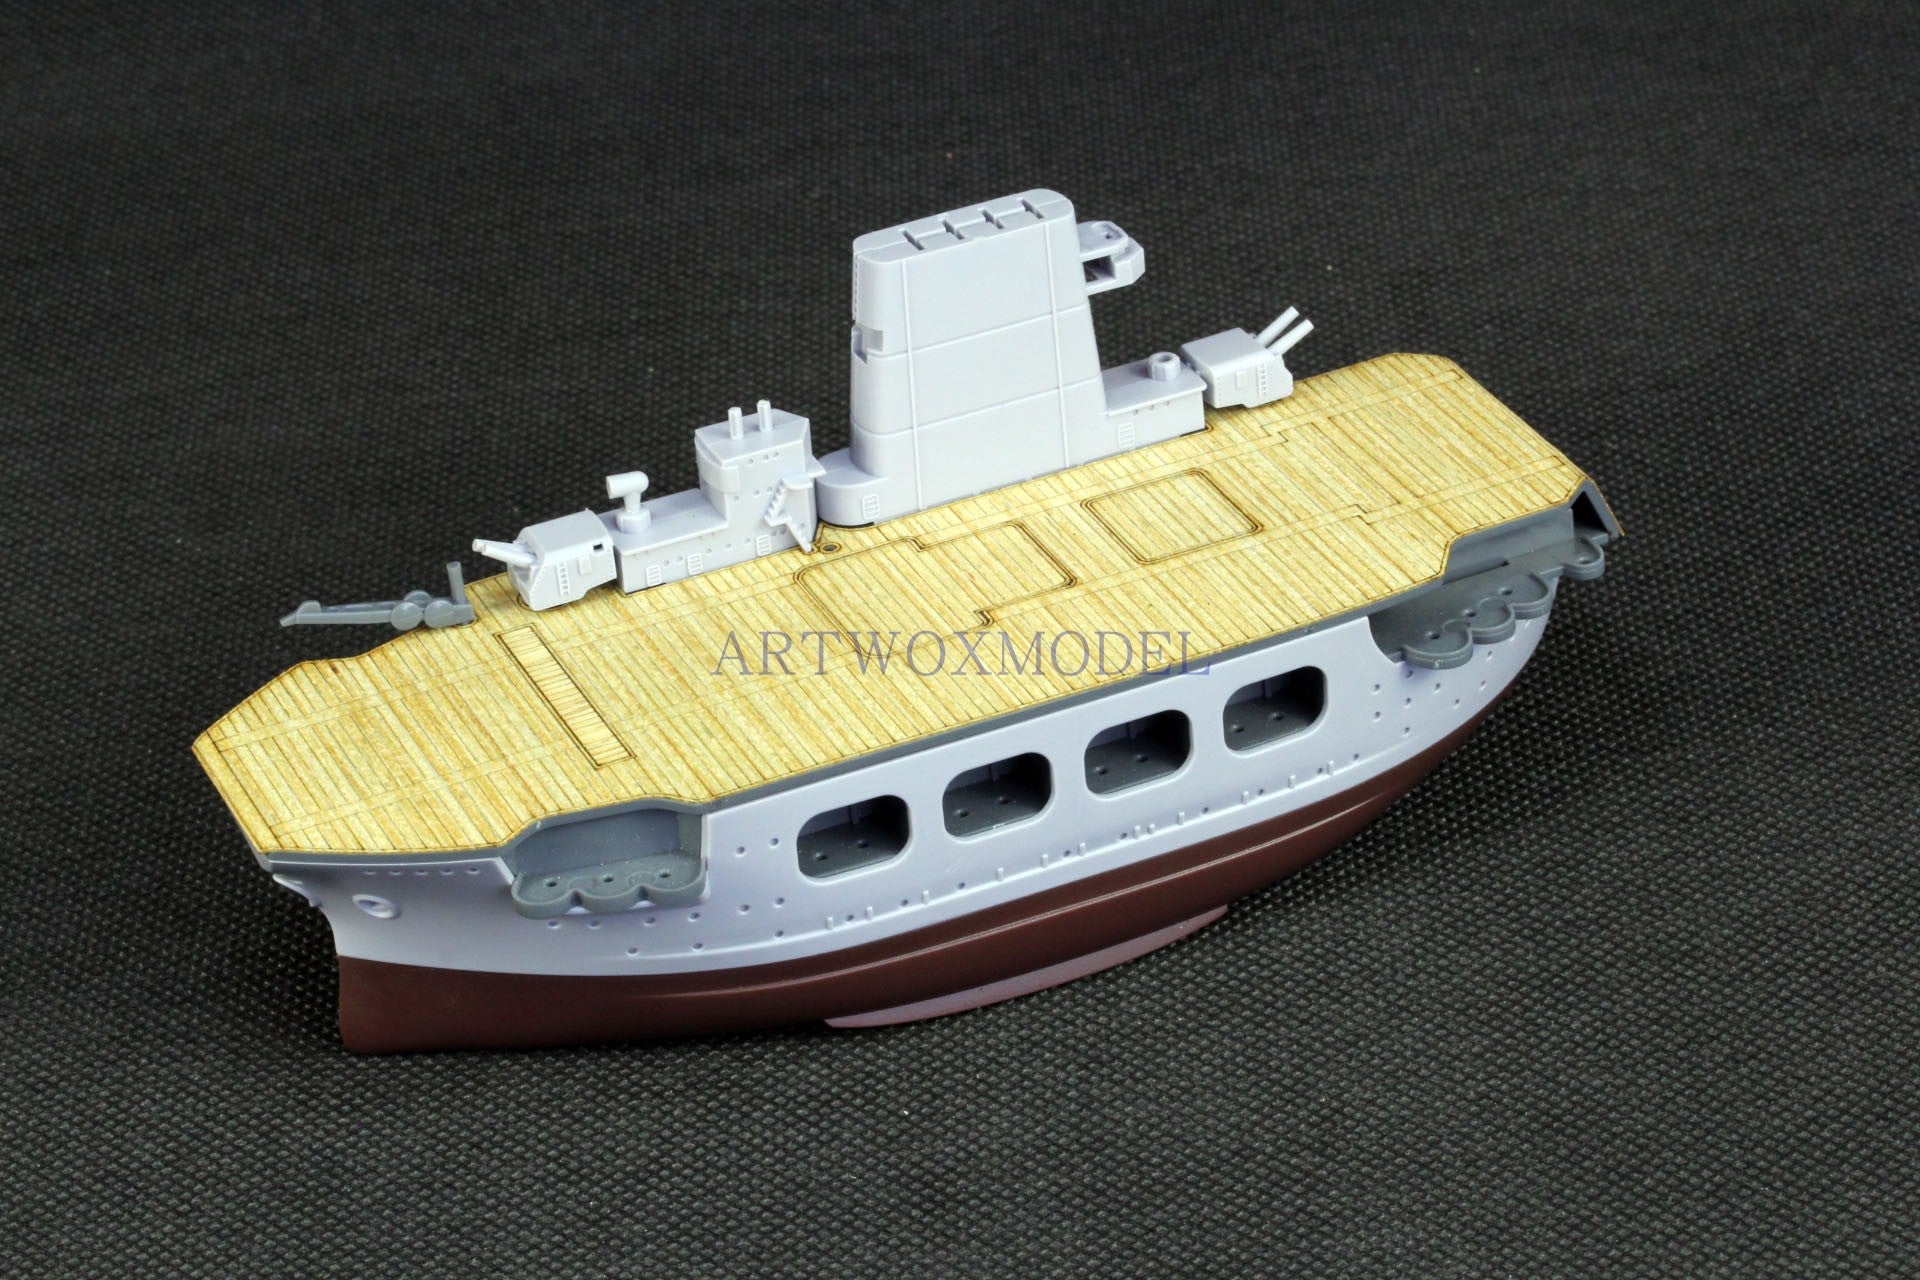 Artwox model wooden deck for MENG WB-001Q version of the American Lexington aircraft carrier contains PE3M spray paint film deck AW50064